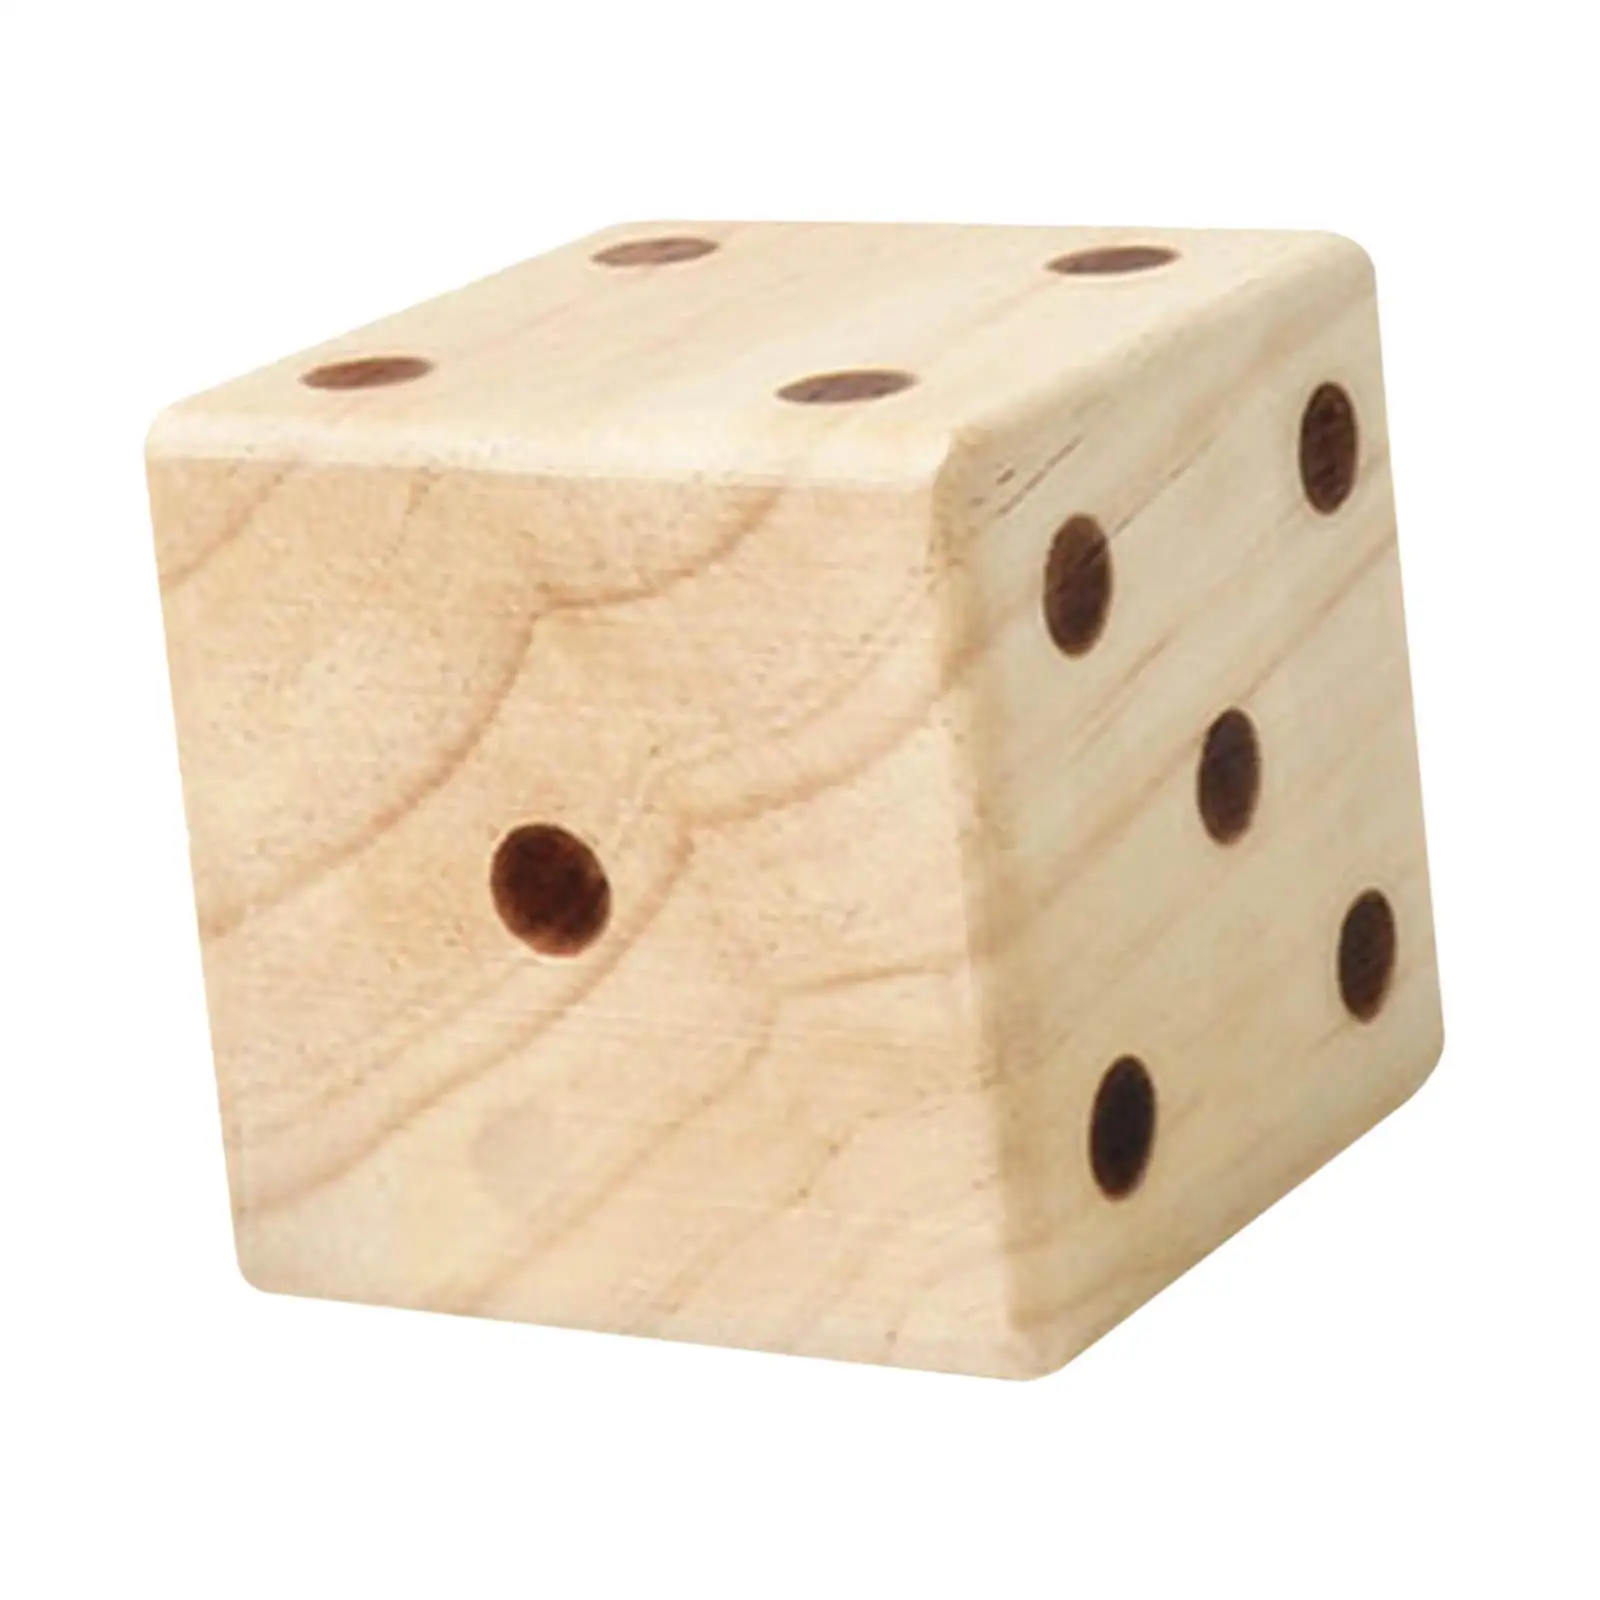 Giant Wooden Yard Dice 7cm/2.36inch Smooth Edge Lightweight Role Playing Dice for Outdoor Indoor Beach Kids Family Adults